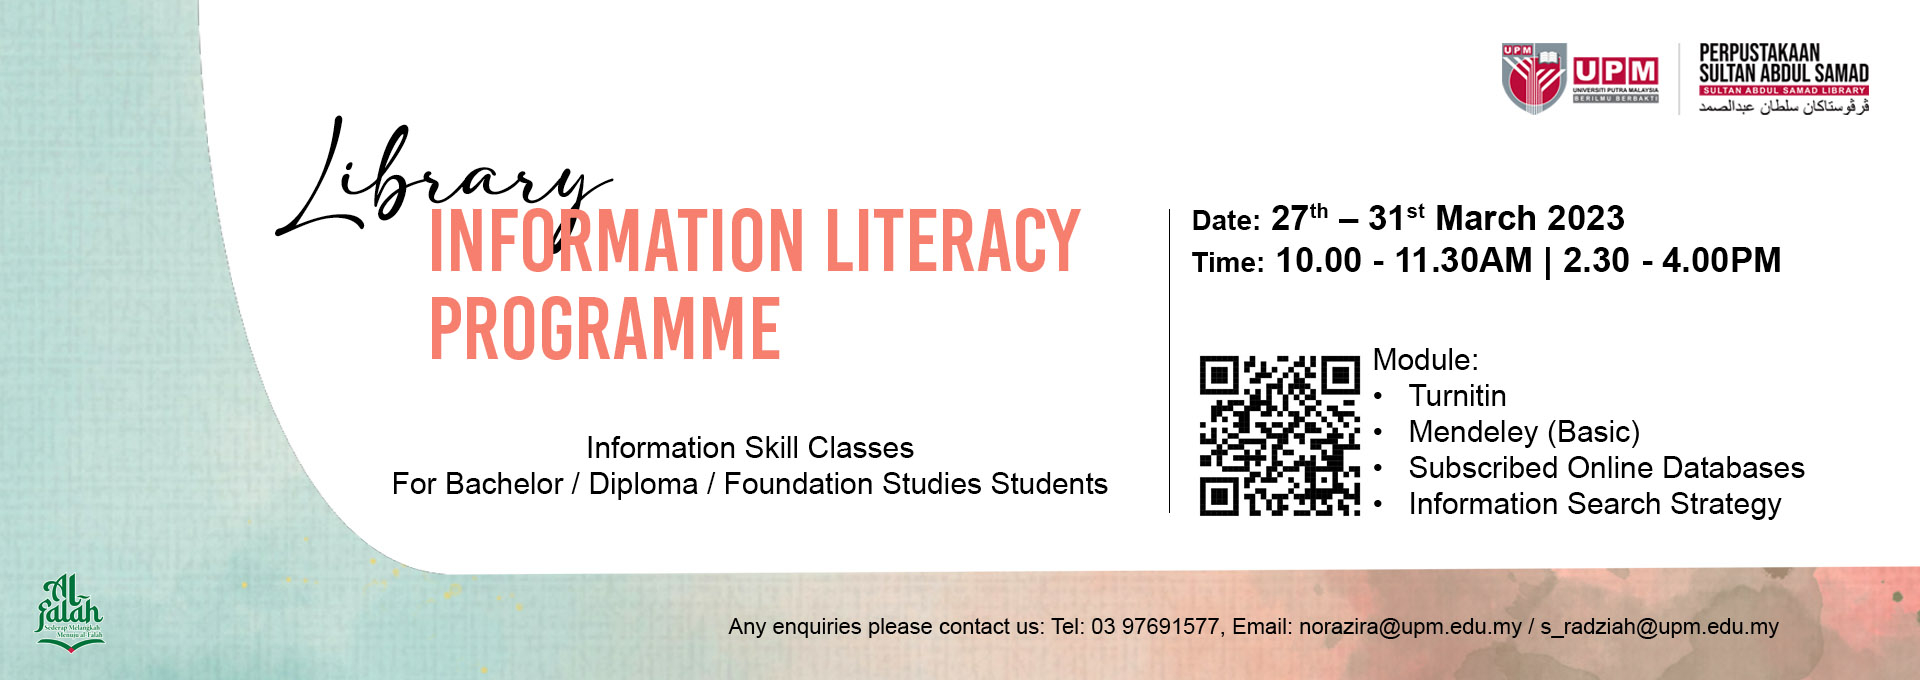 Information Literacy Programme : Information Skilss Classes For Students (Bachelor/Diploma/Foundation Studies)